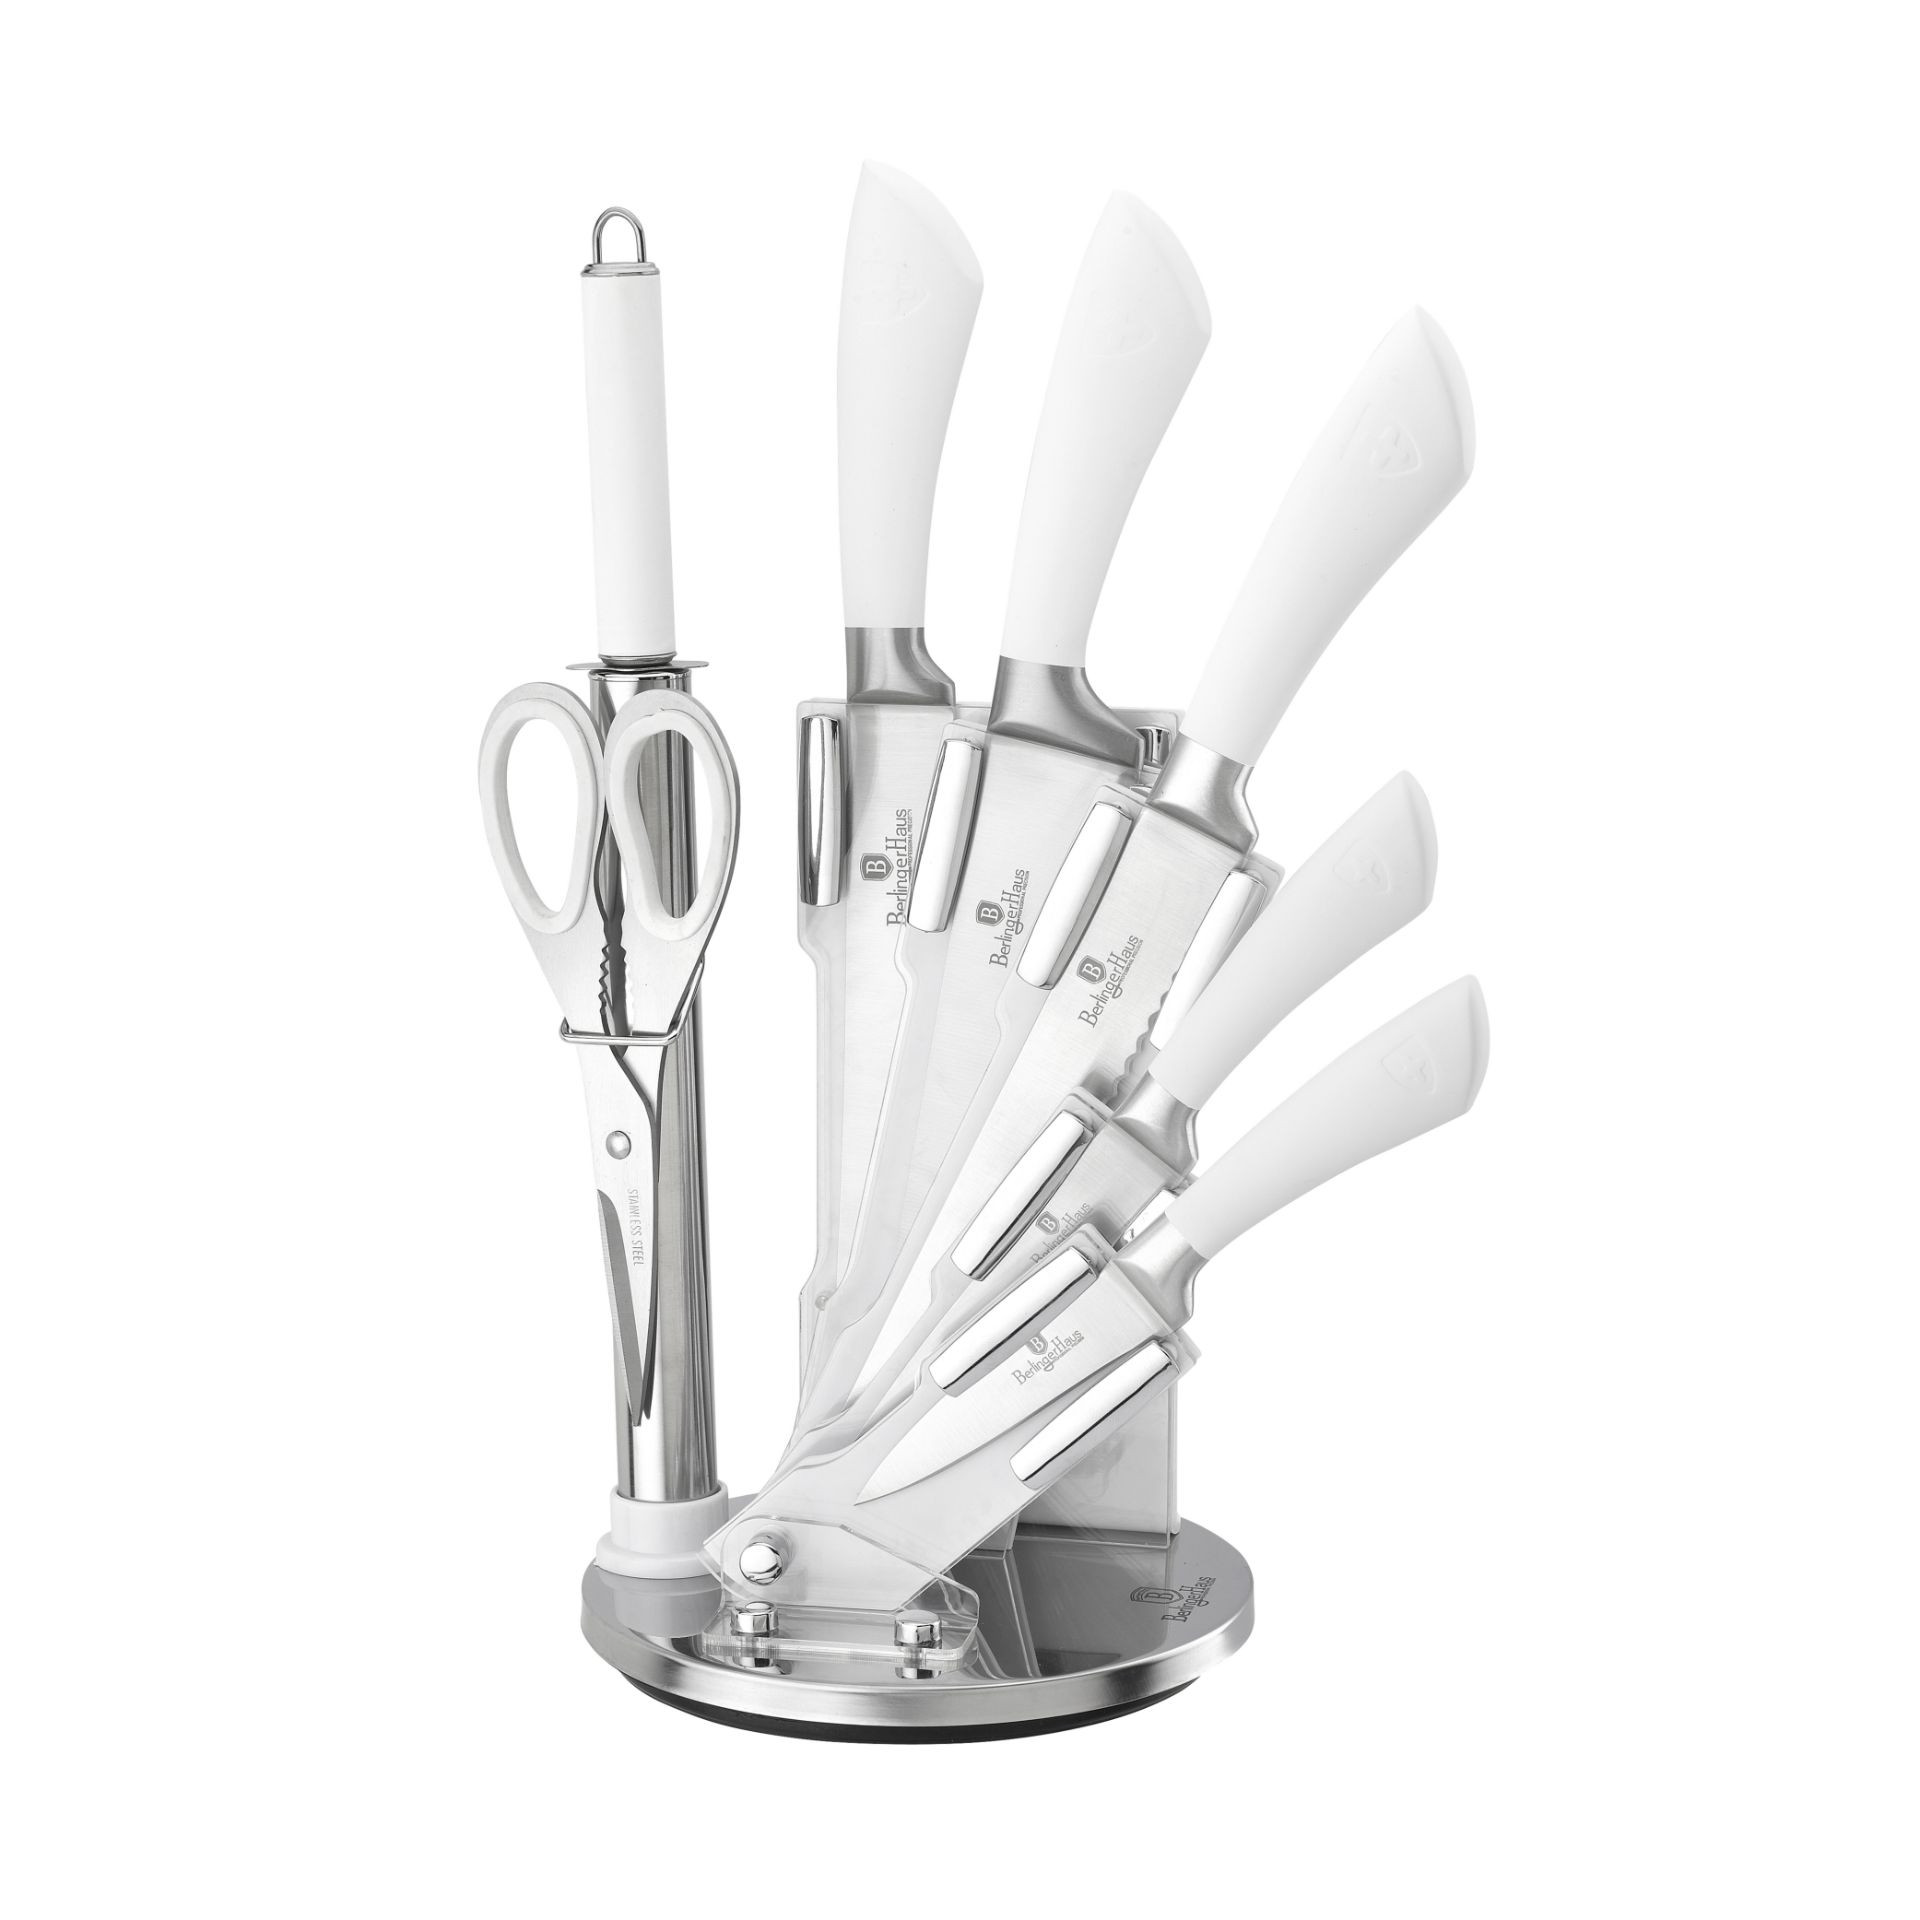 V *TRADE QTY* Brand New Kitchen Line Switzerland 8 Piece Knife Set With Stand Includes 6.5"